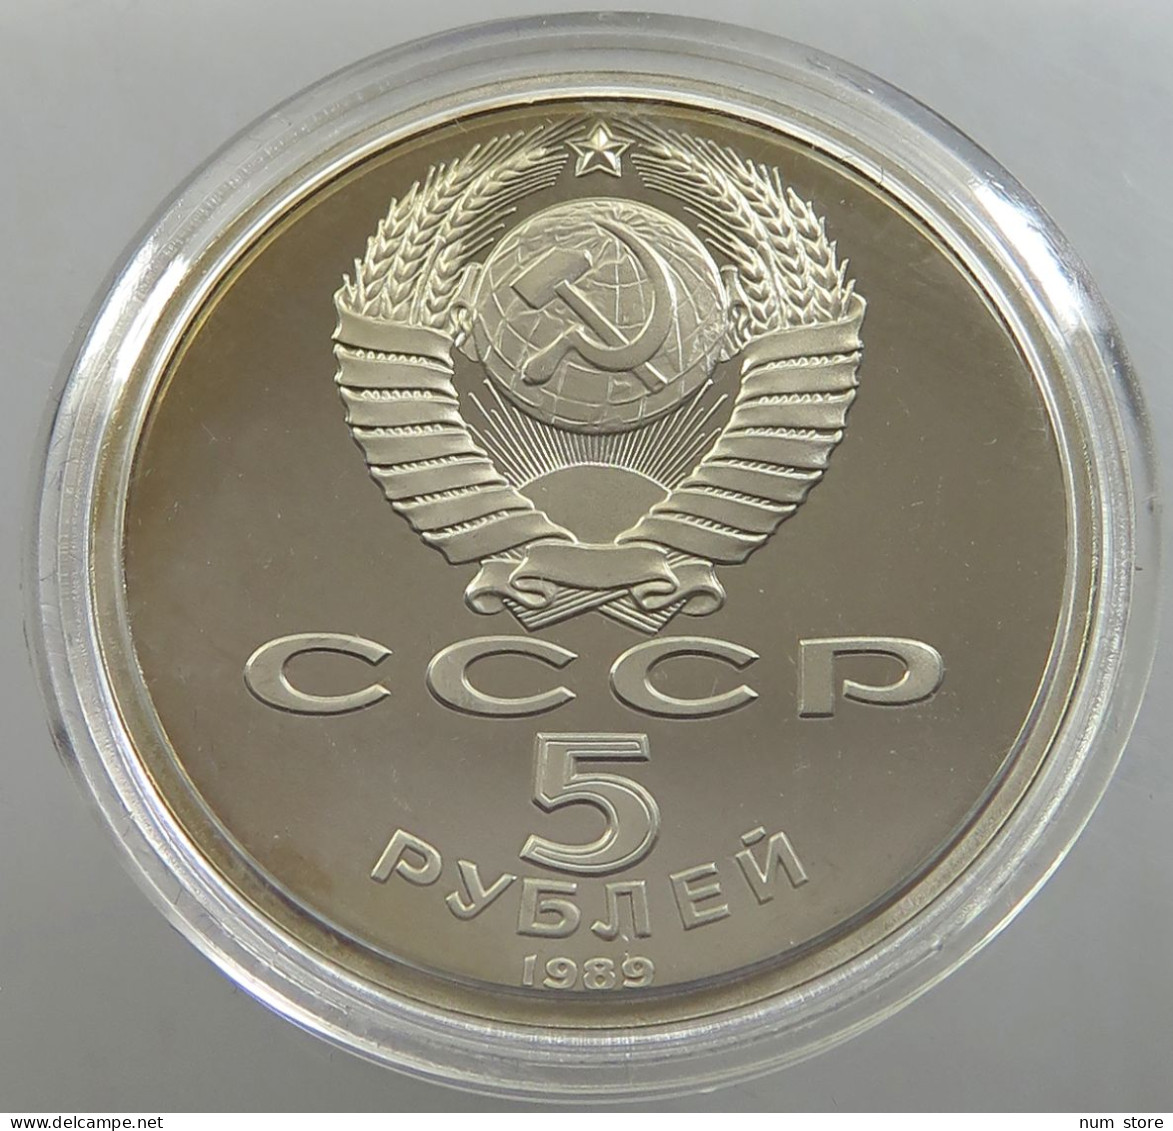 RUSSIA USSR 5 ROUBLES 1989 PROOF #sm14 0435 - Russia